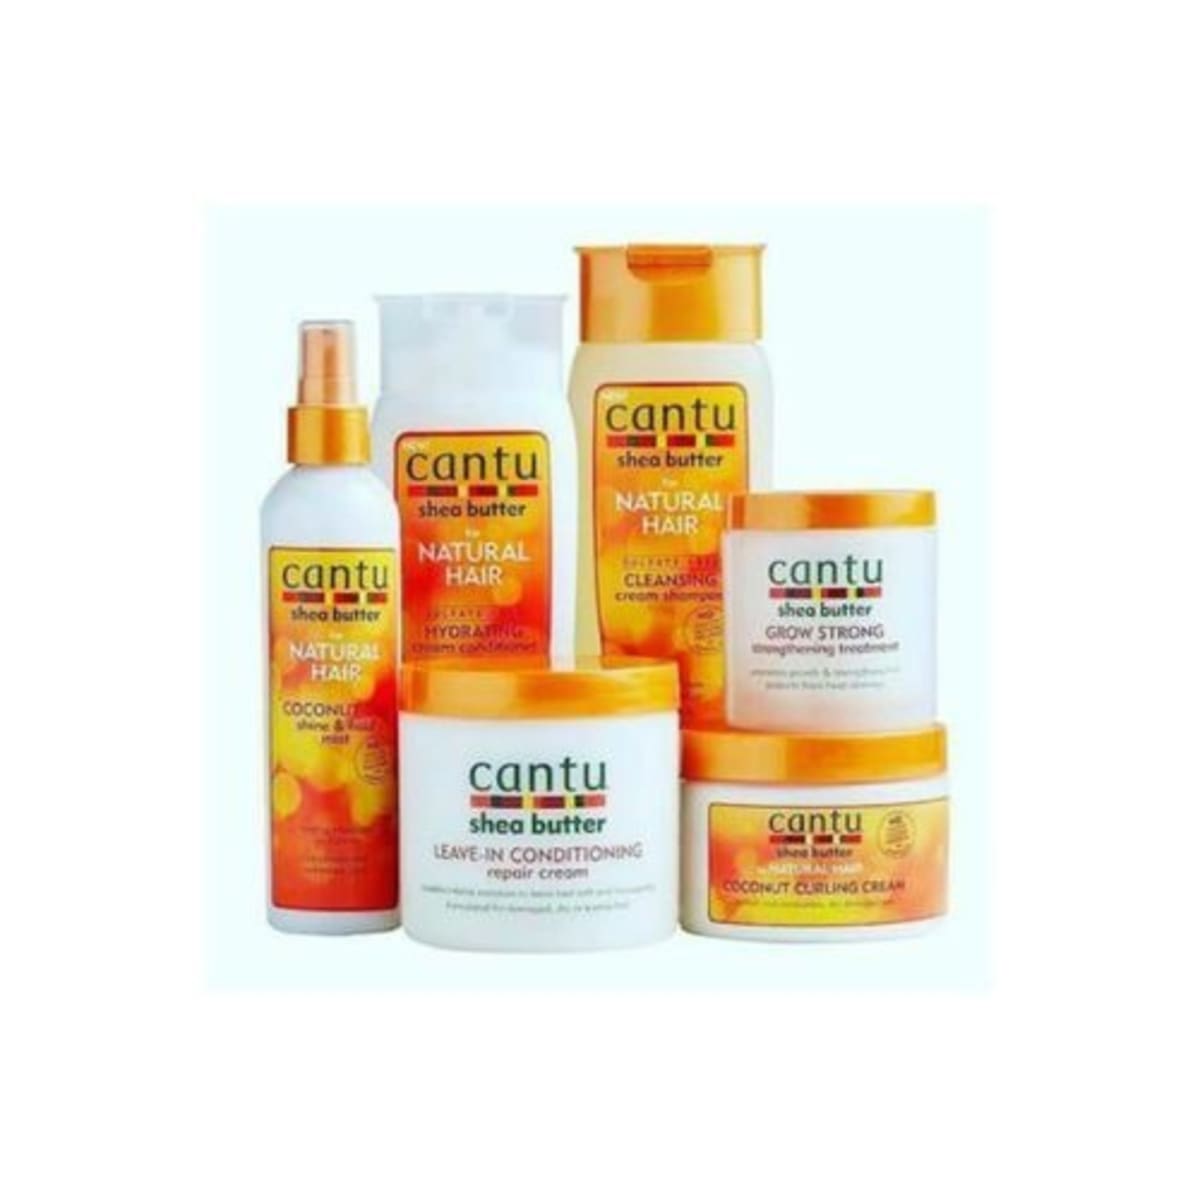 Cantu Care for Kids 6-piece Collection